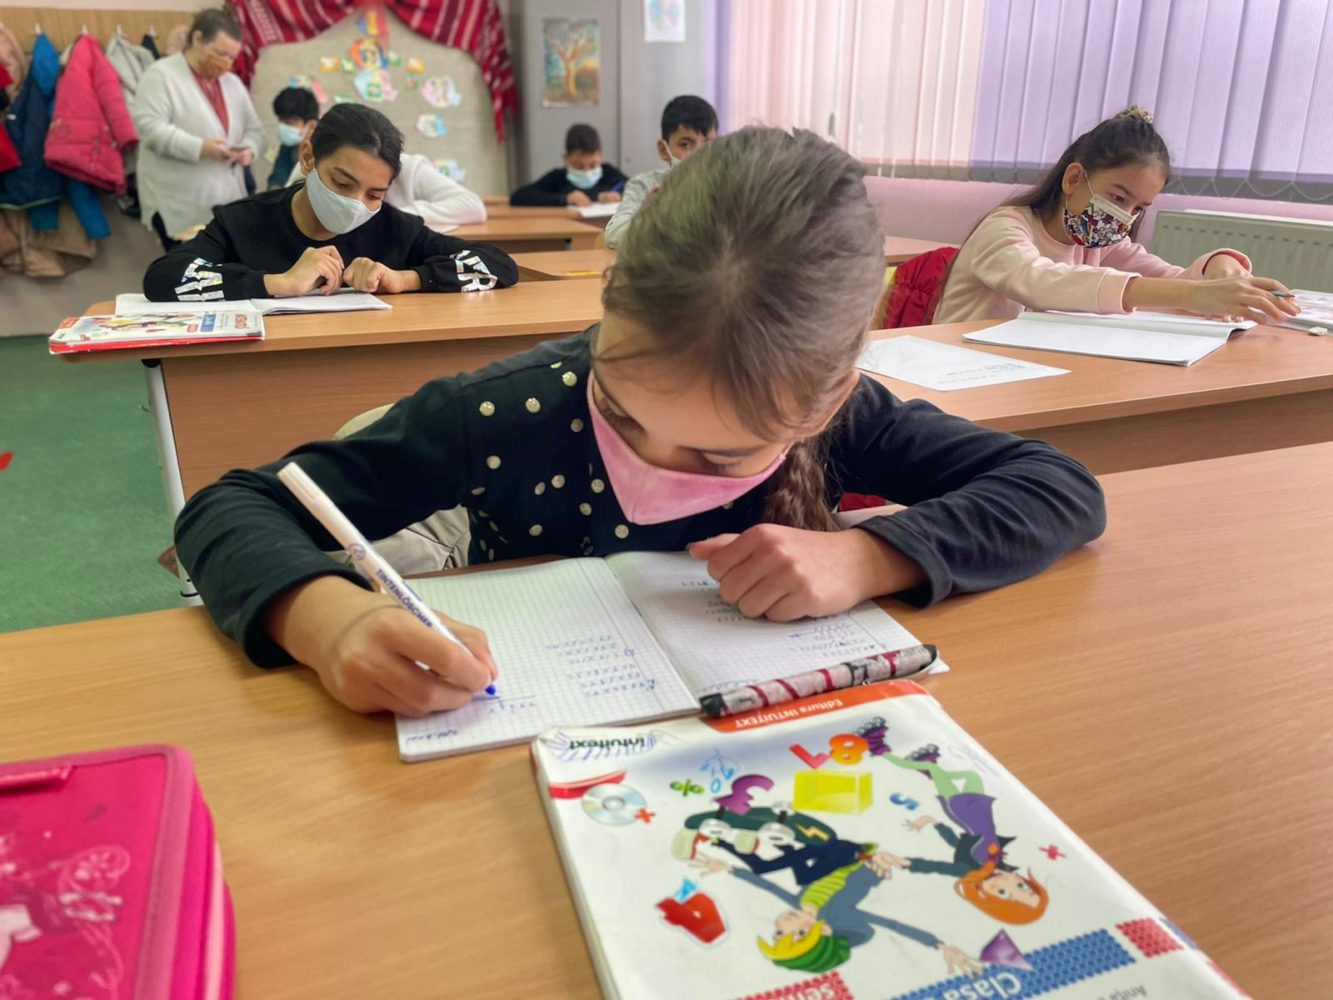 Image of a child in a classroom. The child is writing on a workbook